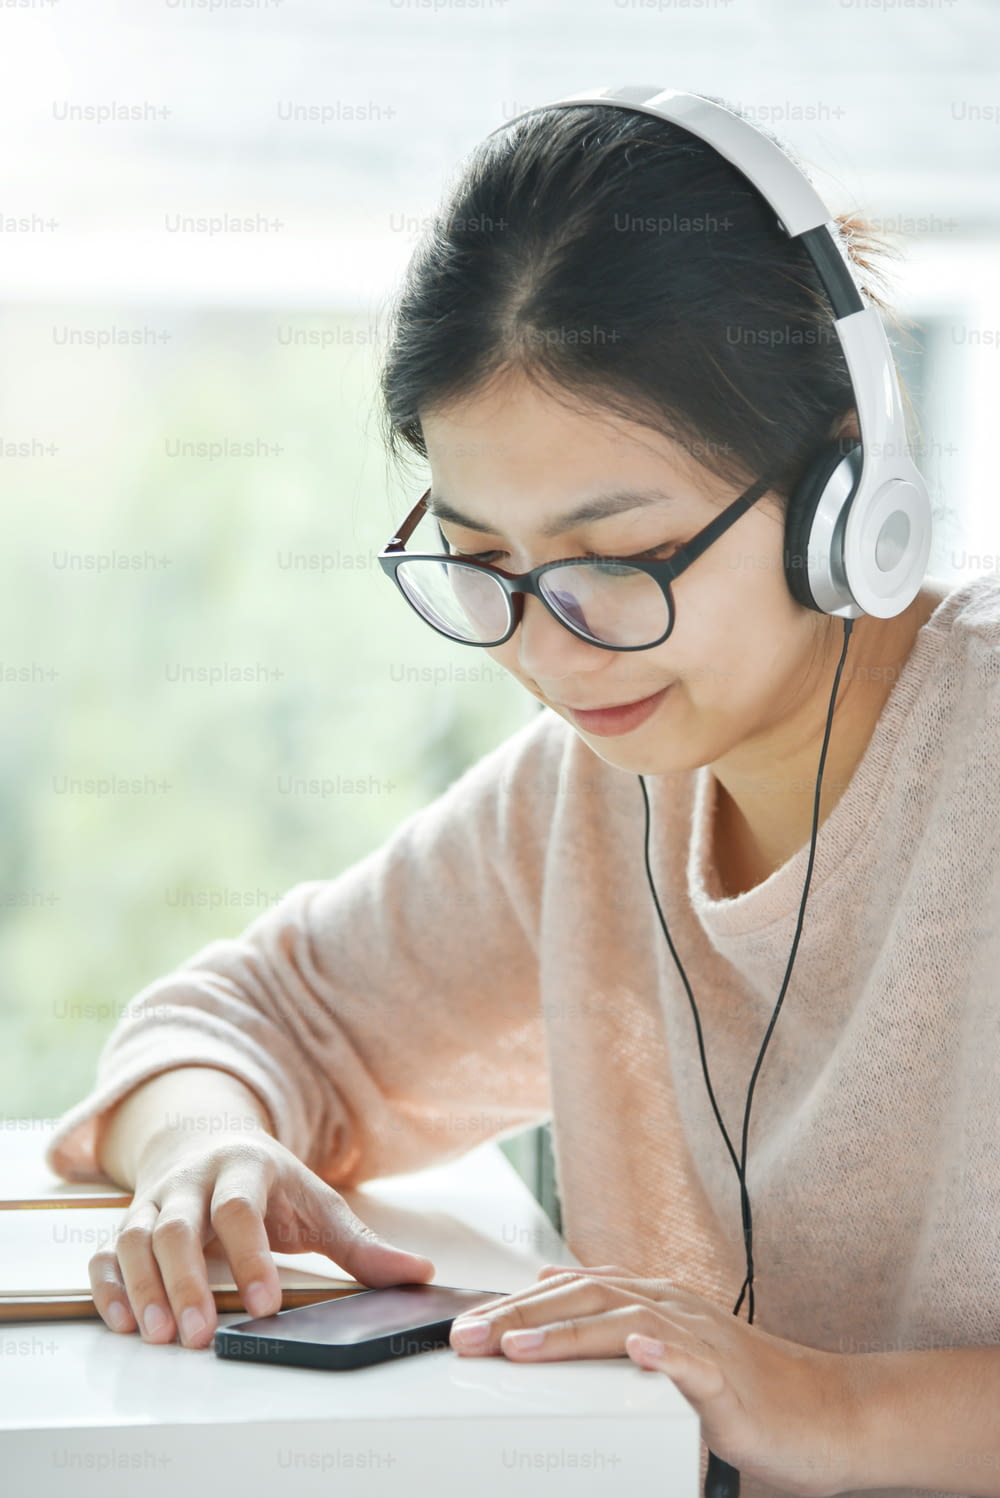 Happy Beautiful Asian woman listening to the music with headphone 